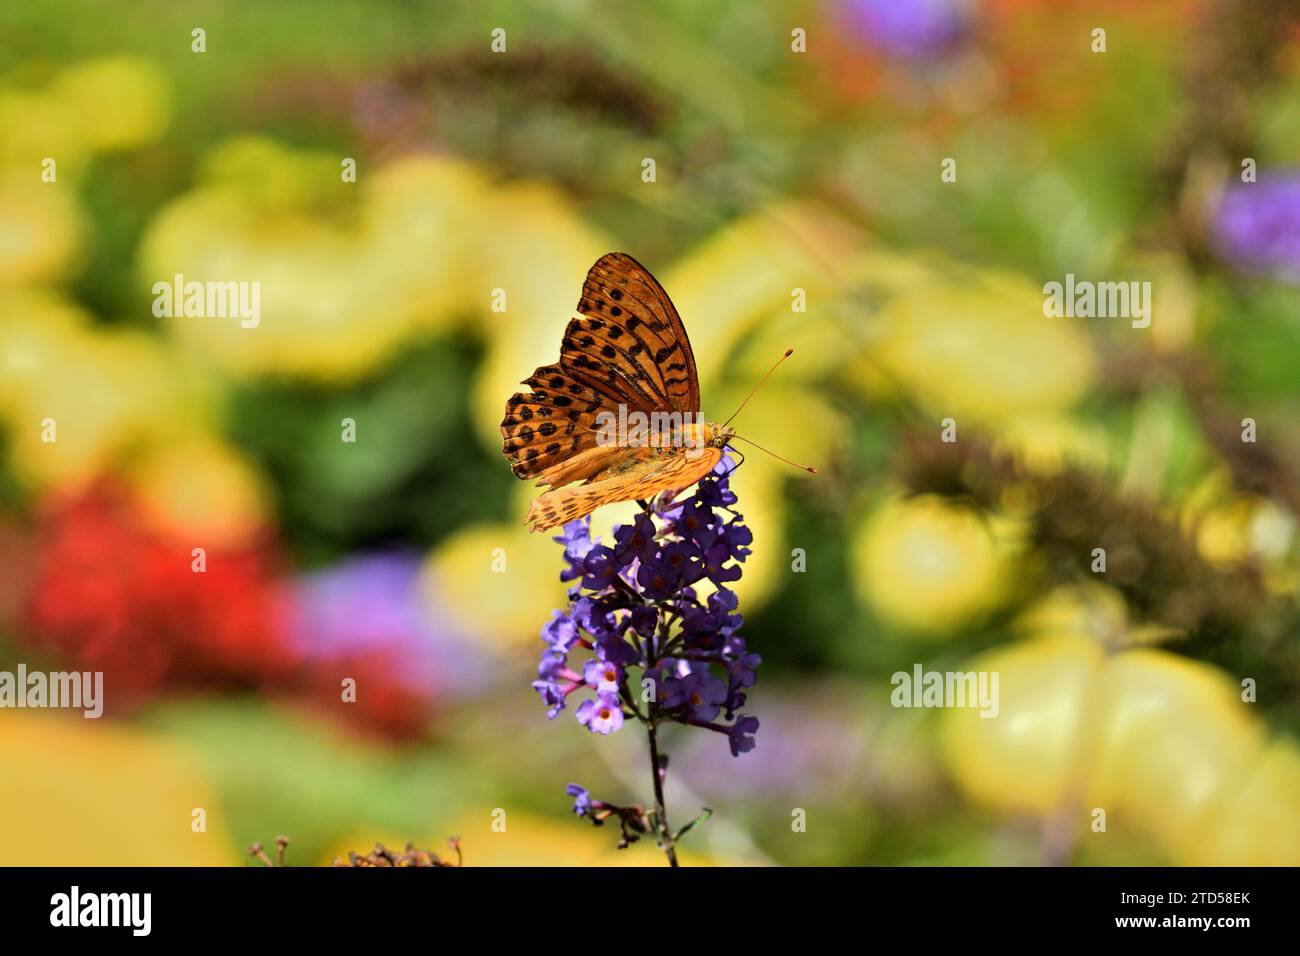 The comma polygonia butterfly fly in meadow full of colorful flowers Stock Photo